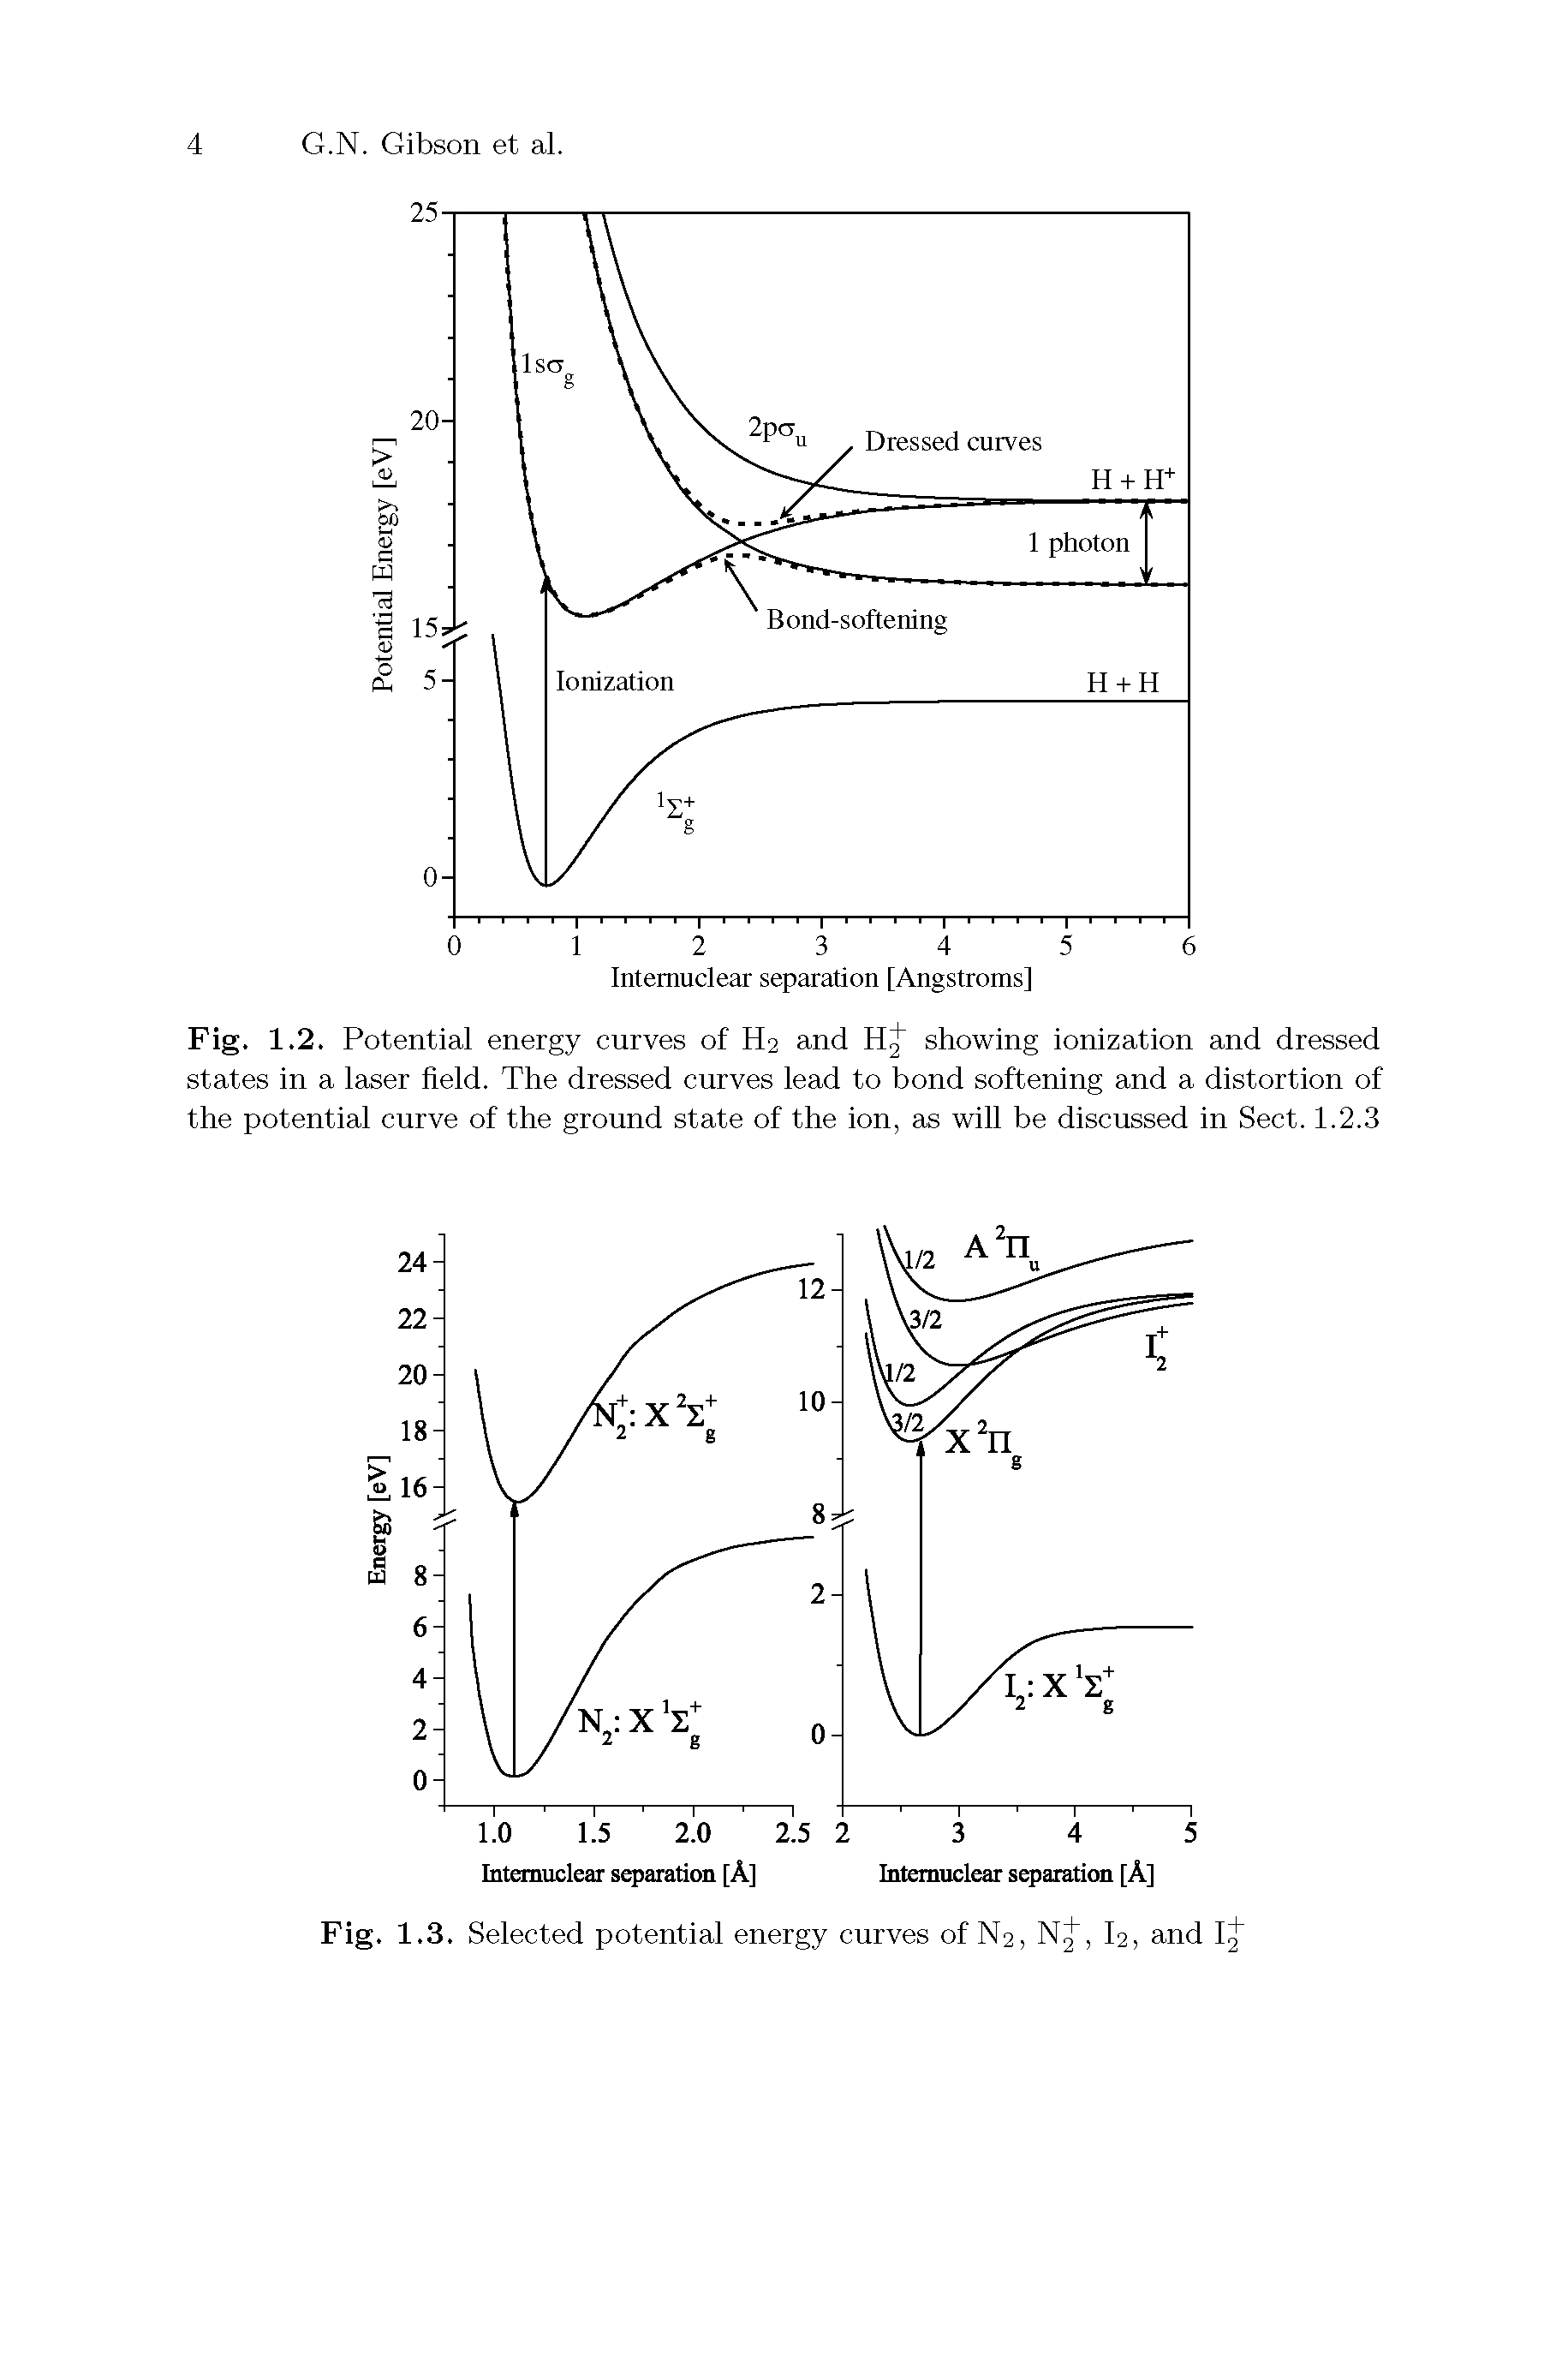 Fig. 1.2. Potential energy curves of H2 and Hj showing ionization and dressed states in a laser field. The dressed curves lead to bond softening and a distortion of the potential curve of the ground state of the ion, as will be discussed in Sect. 1.2.3...